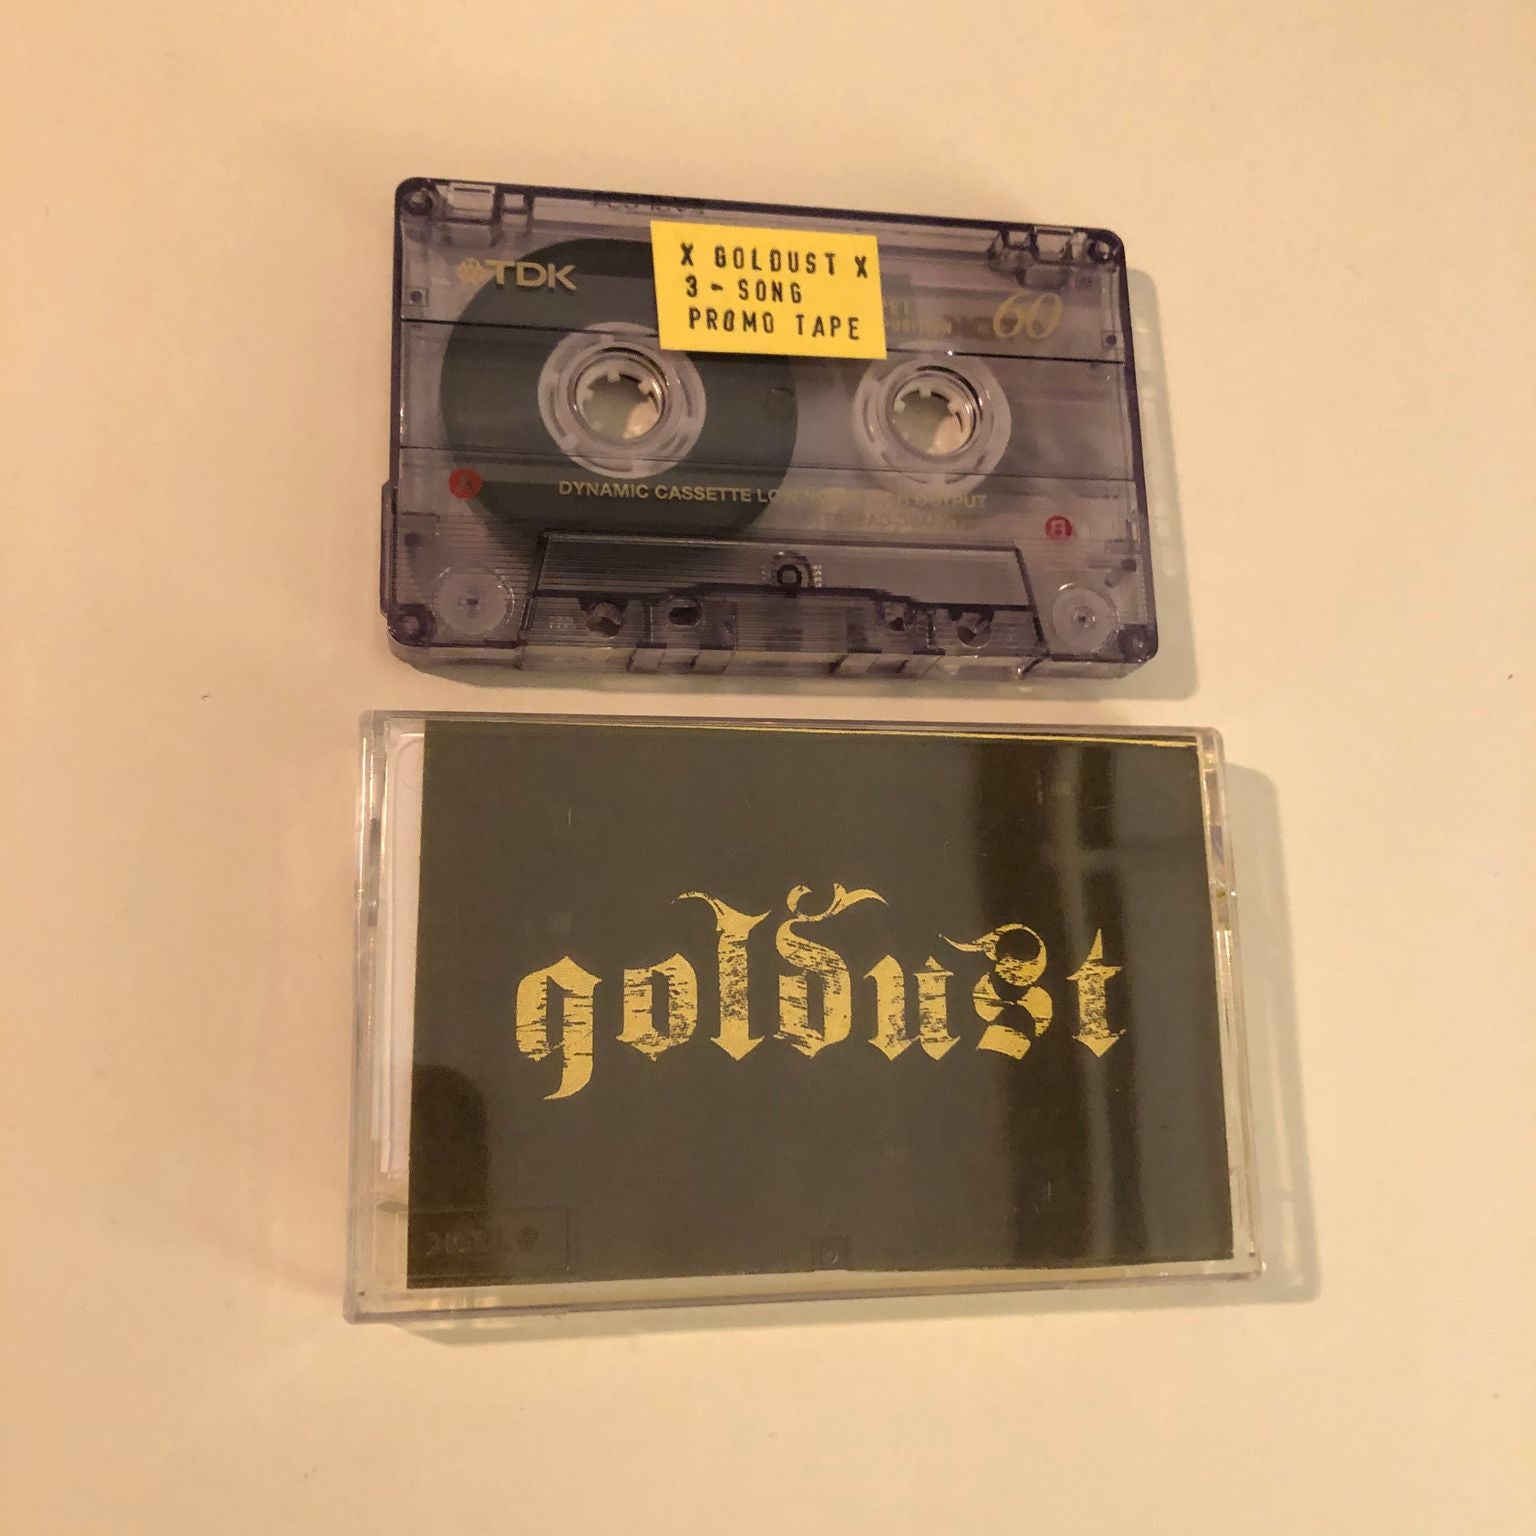 GOLDUST • 3 Song Promo Tape • yellow cover